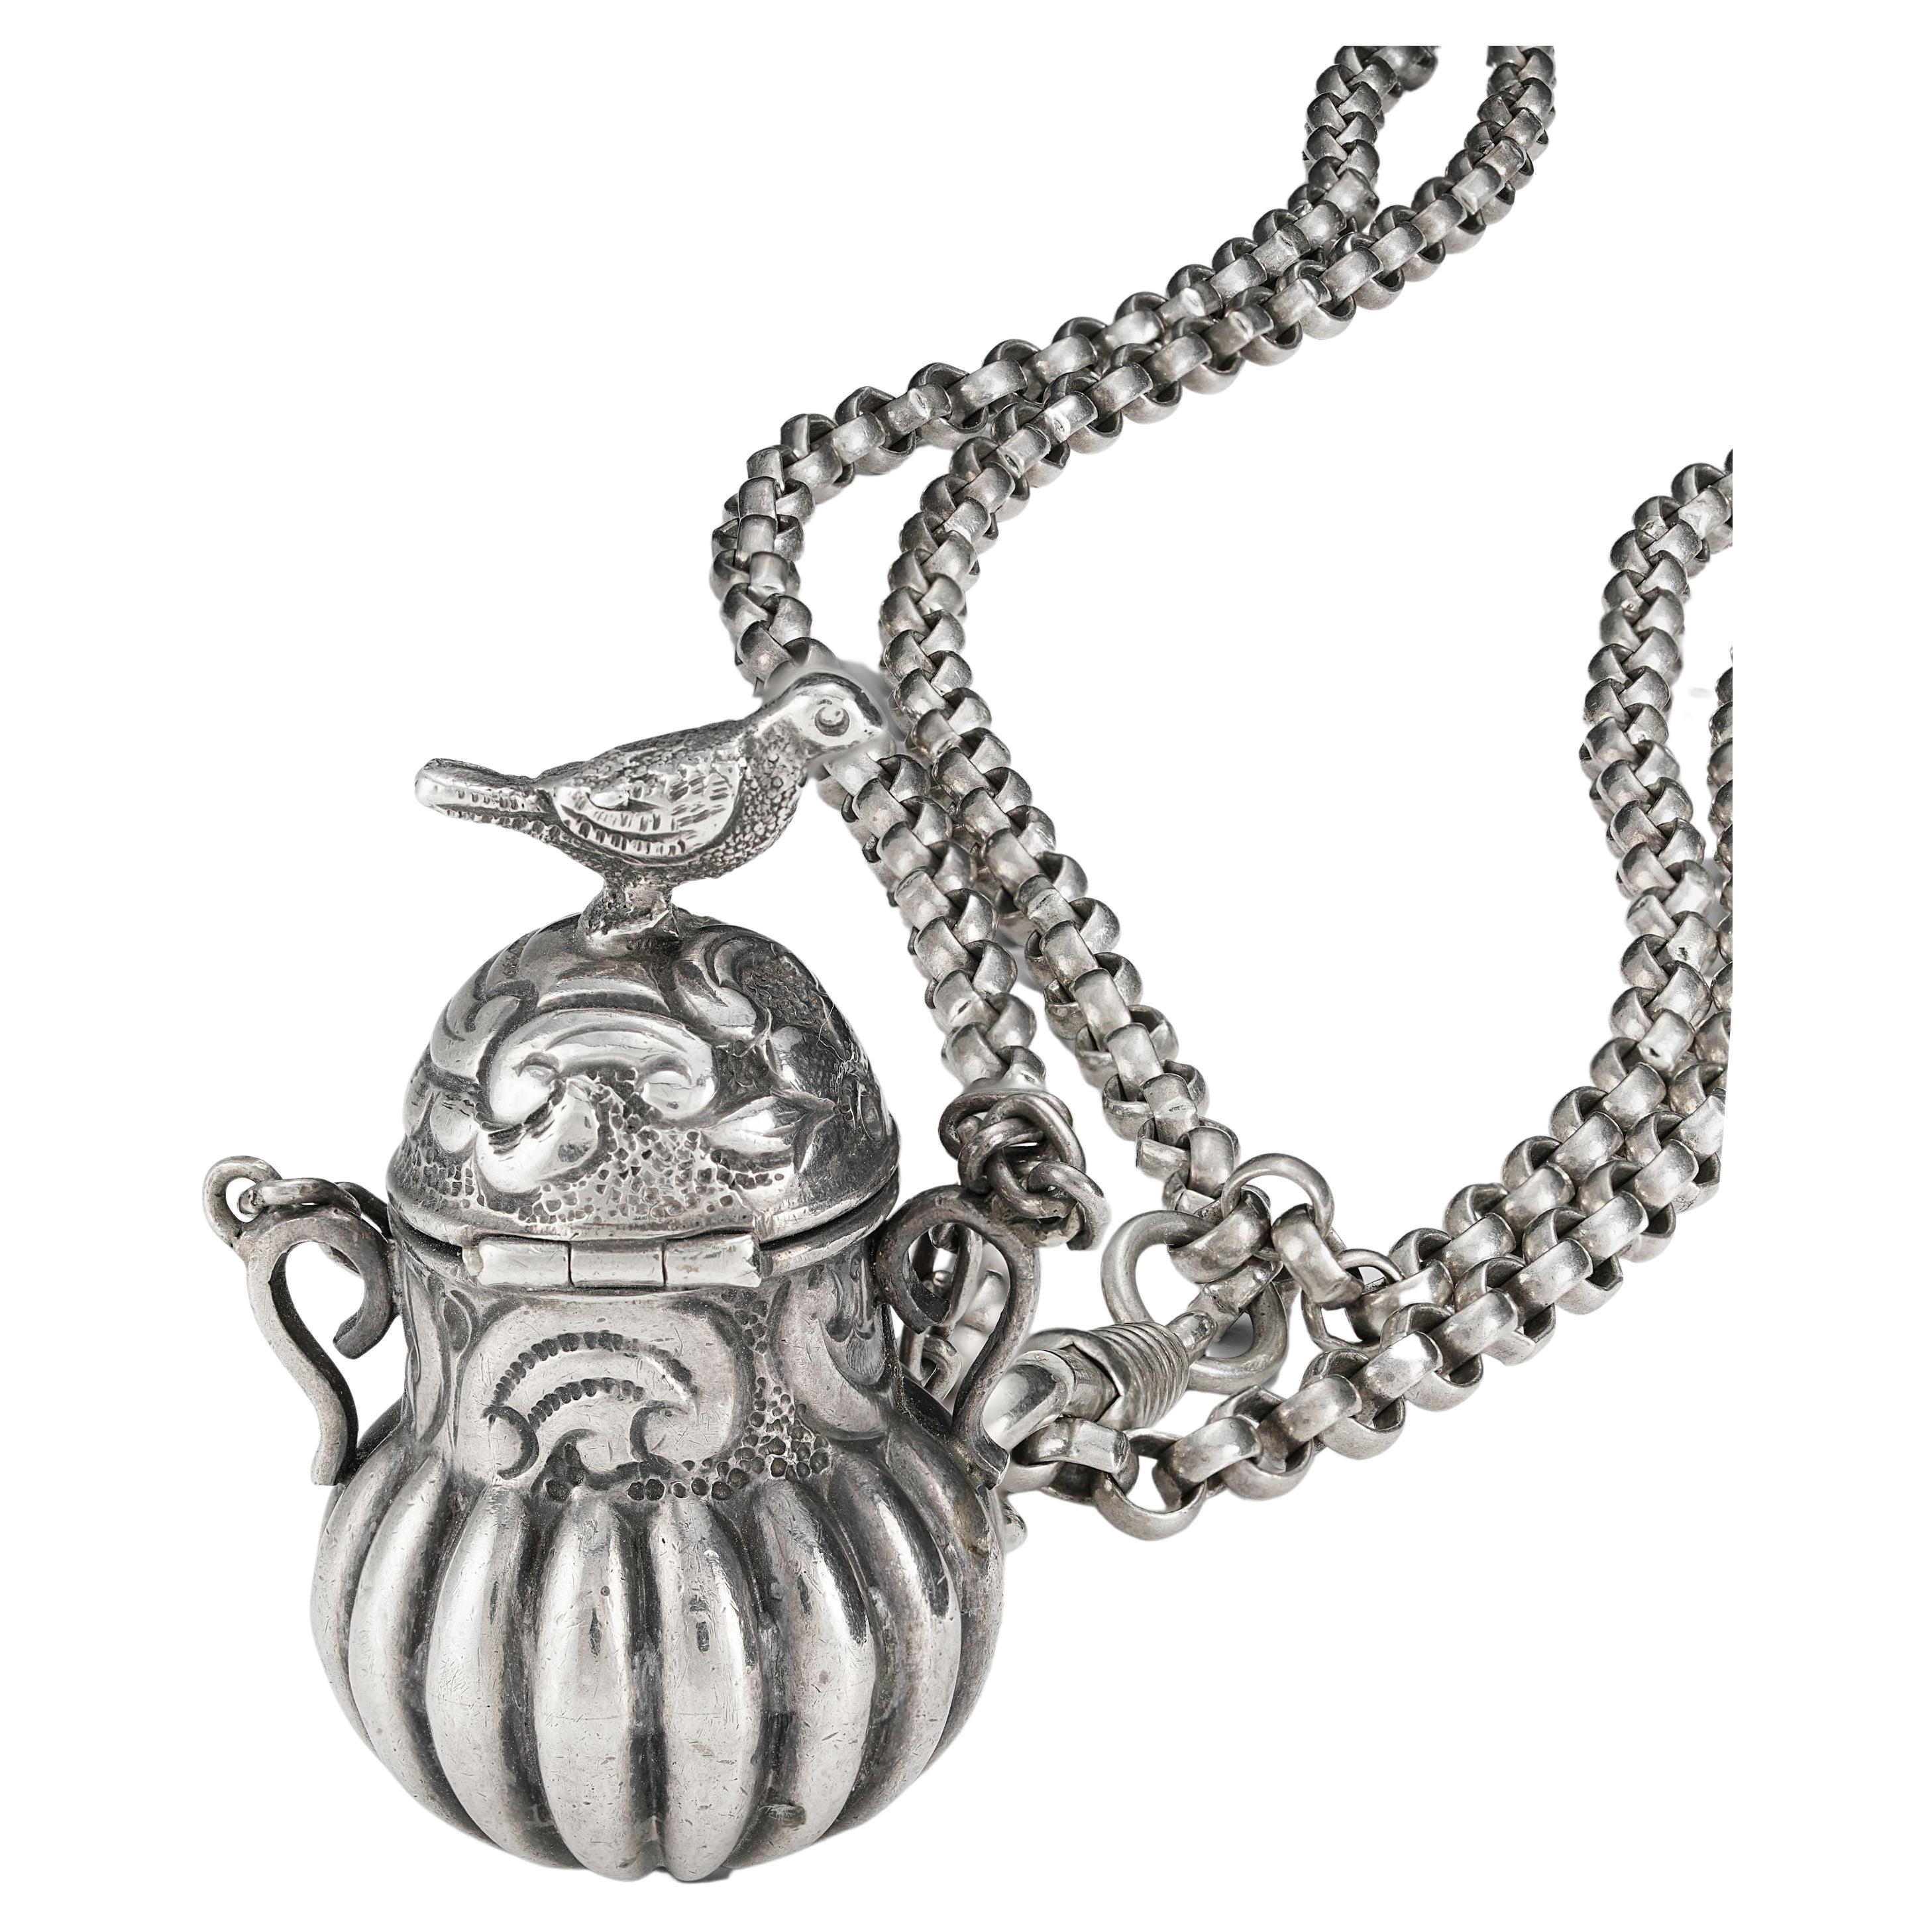 Simply Fabulous and Rare! Beautifully Hand crafted and engraved Sterling Silver Vinaigrette Pendant. Modeled as a Vessel topped with a Bird finial. The hinged Lid opens to reveal a Gilded pierced grill with intricate scroll filigree design.